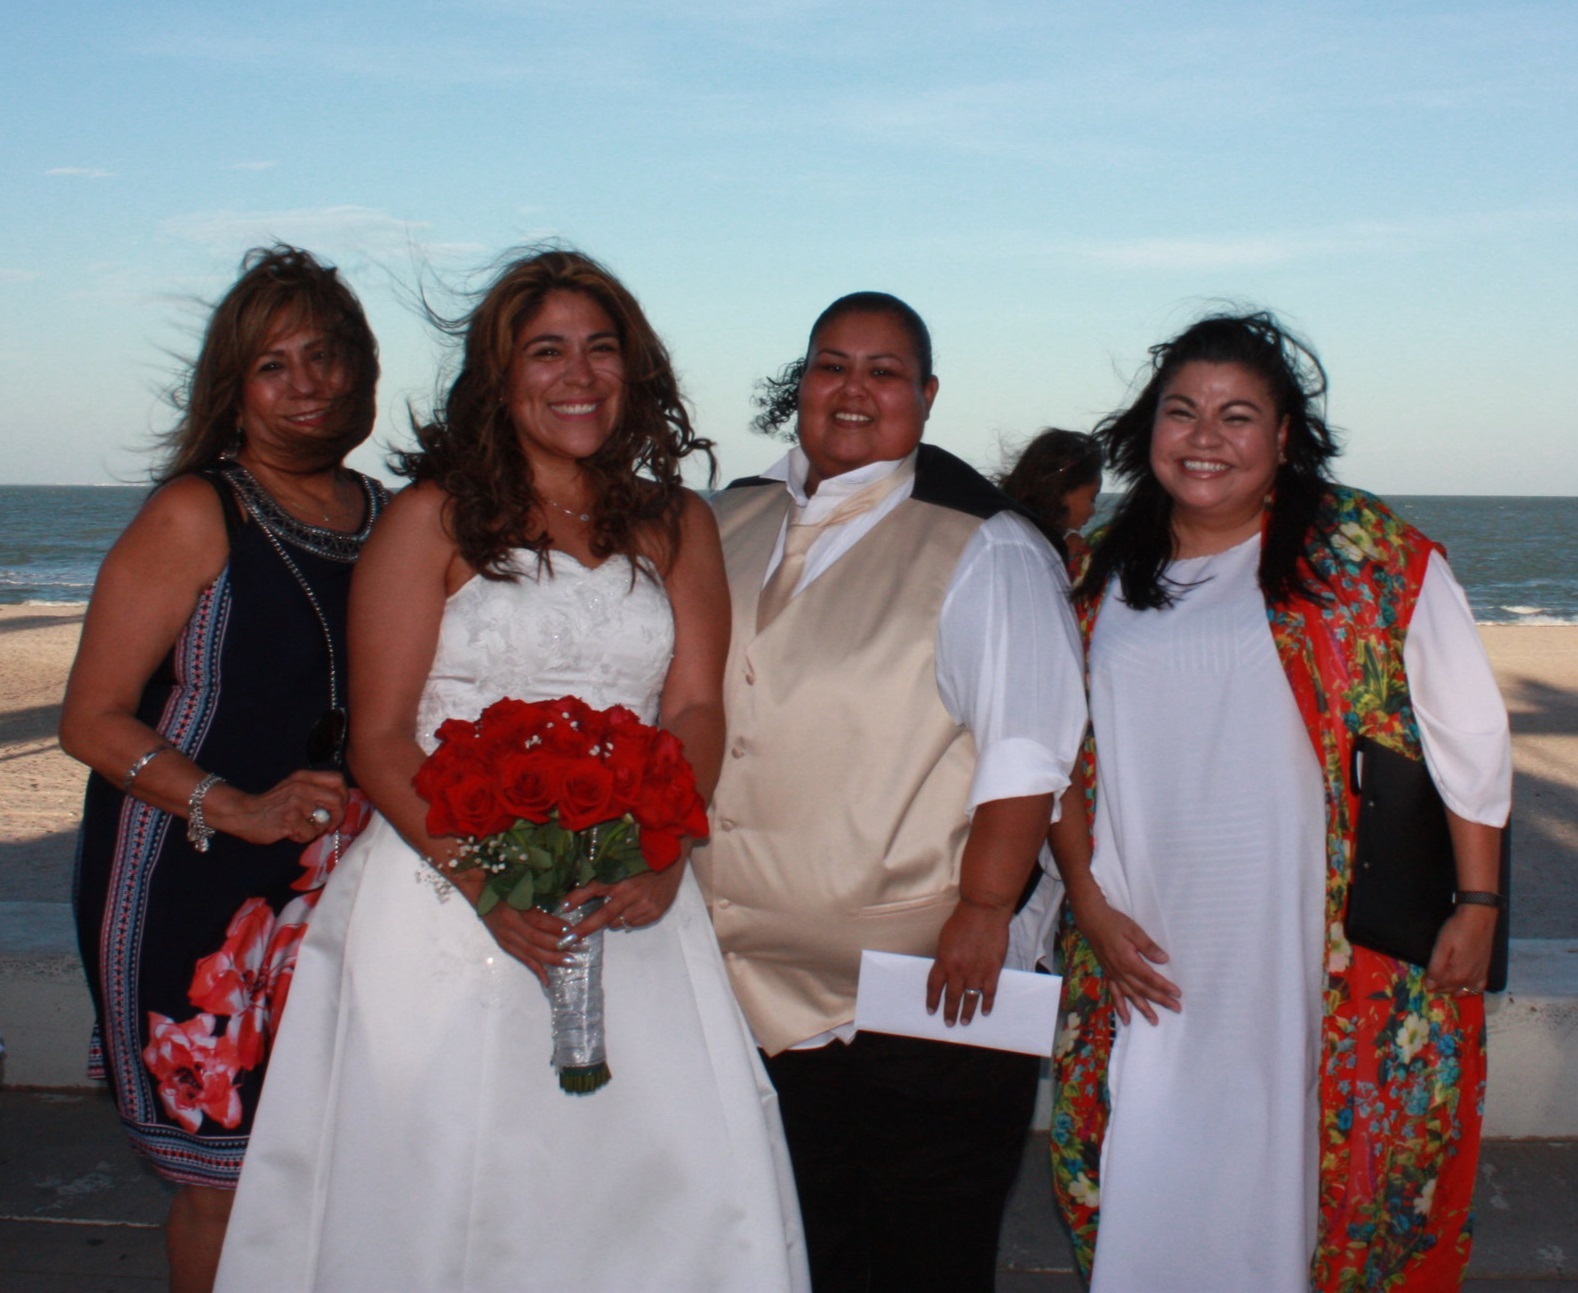 LGBTQIA+ wedding by the sea performed by The Love Officiant Renee Reyes